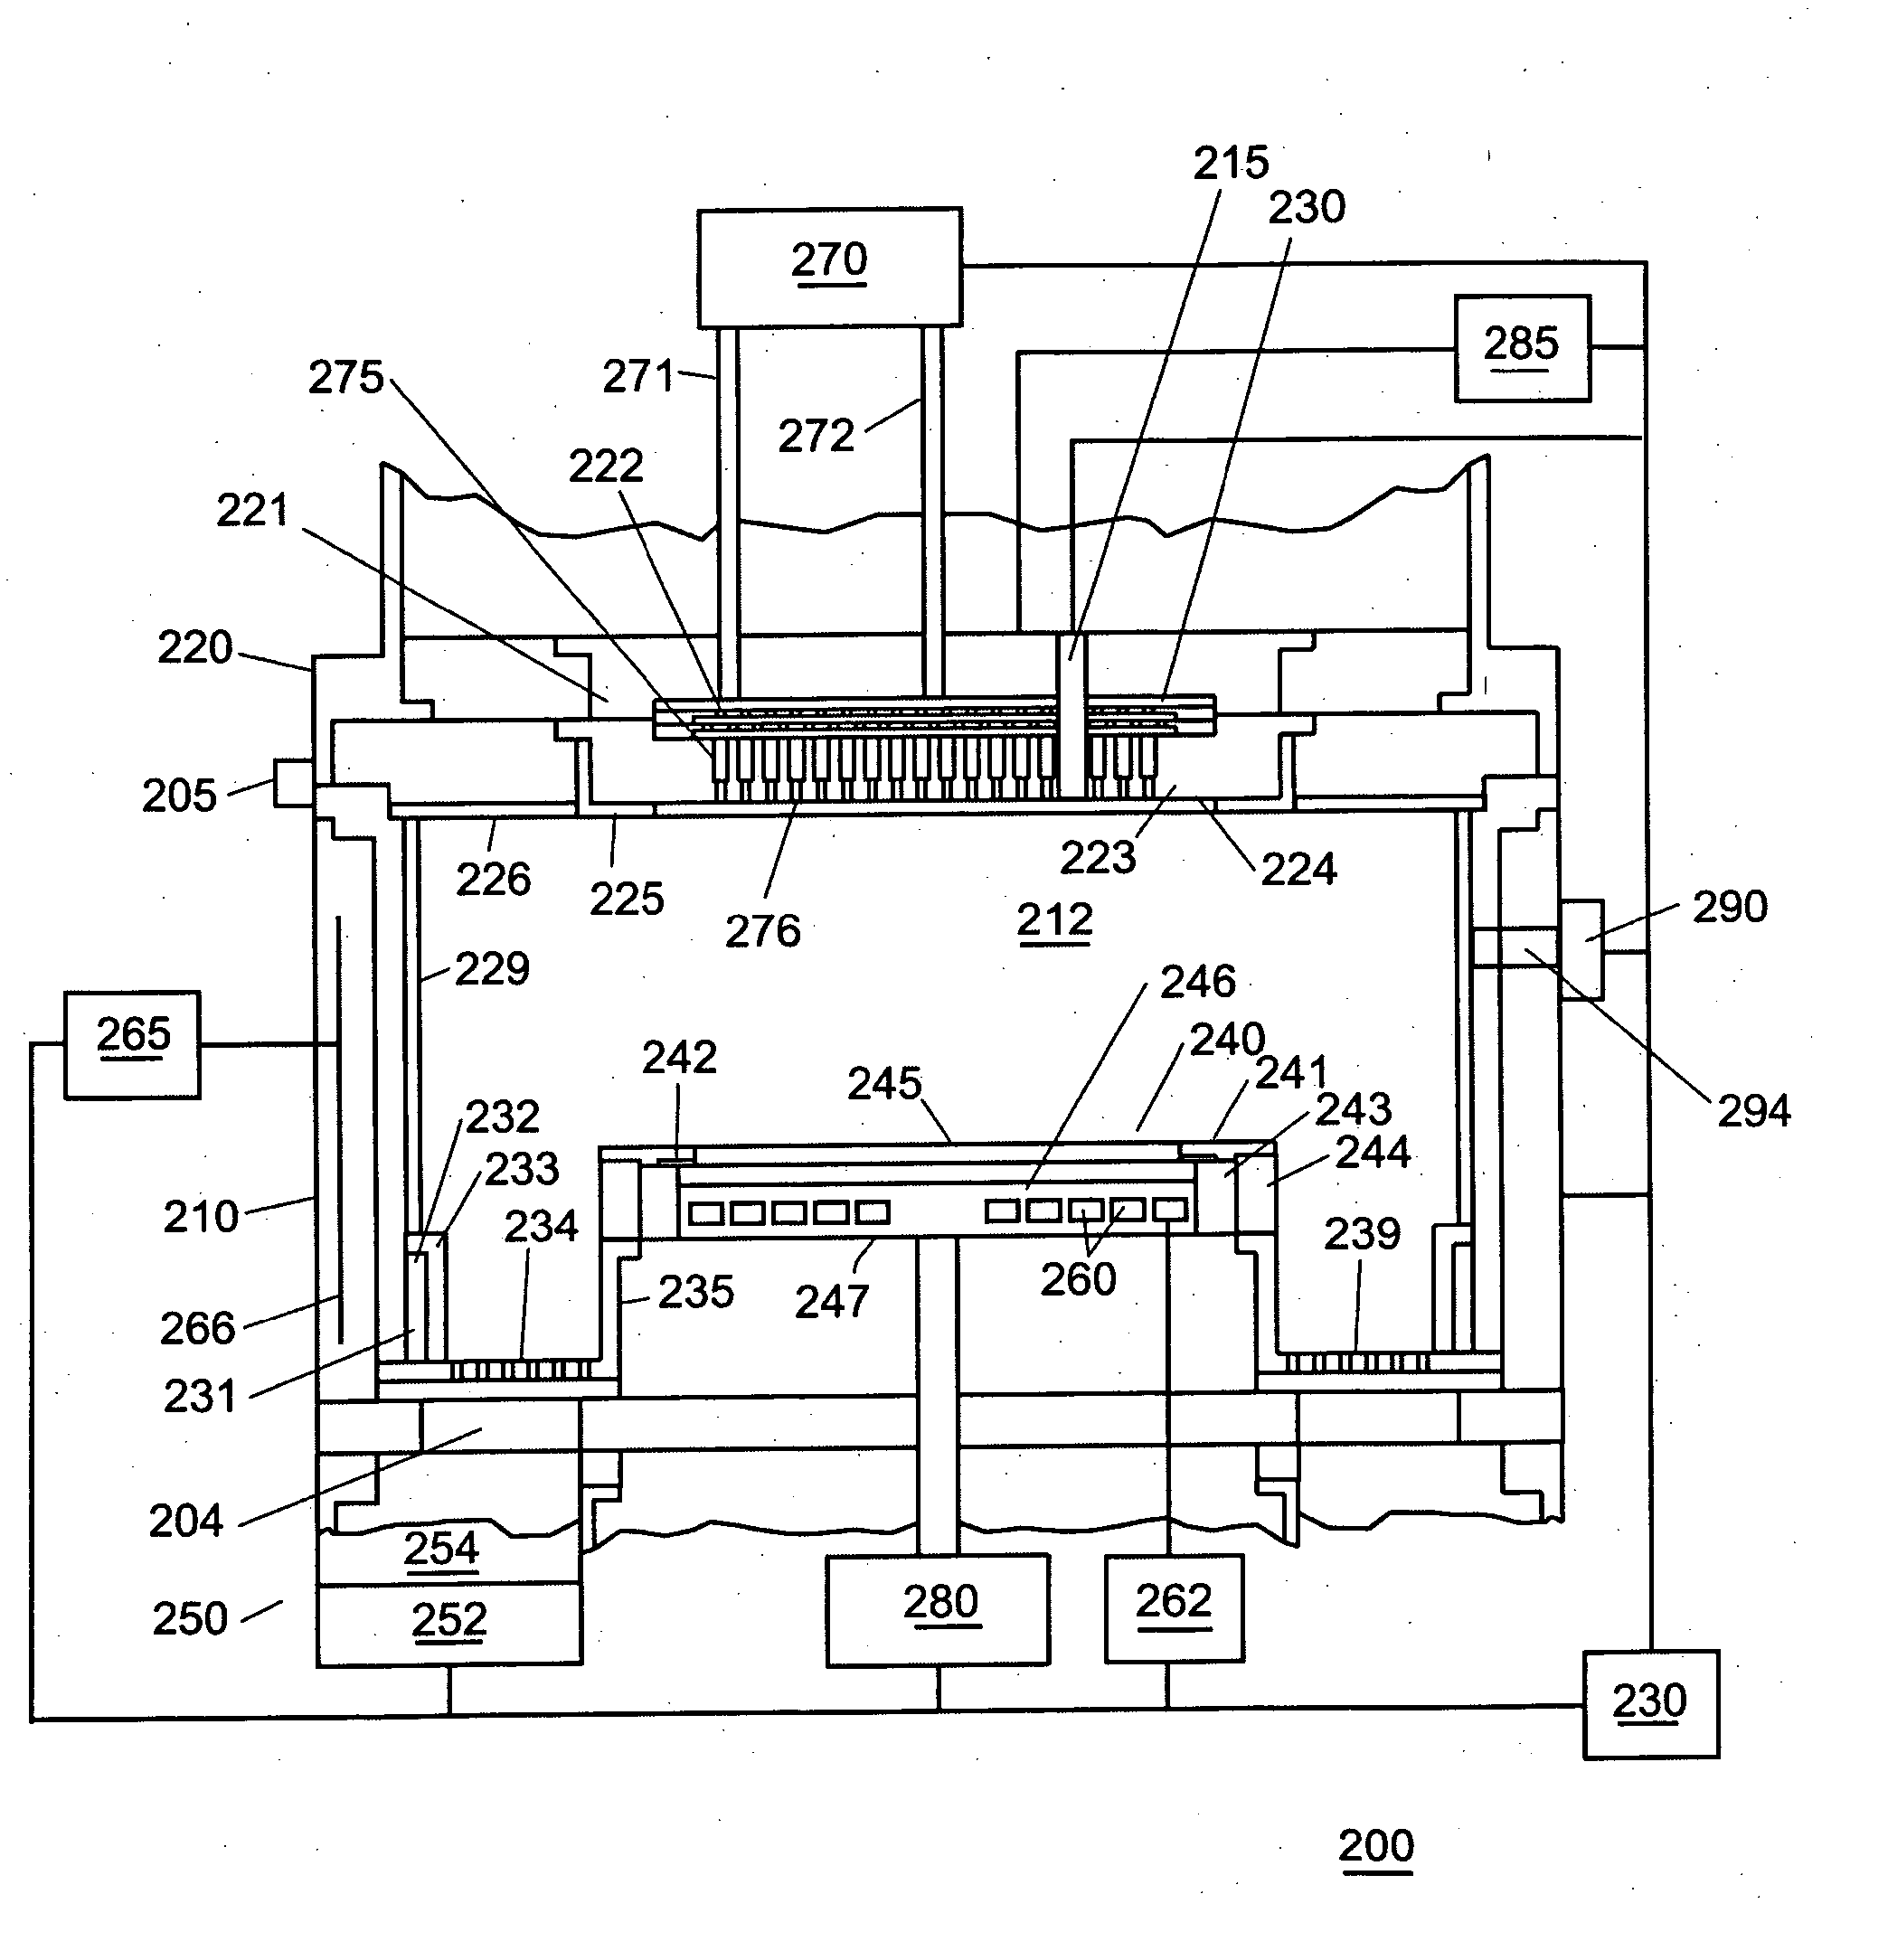 Method for conditioning a process chamber